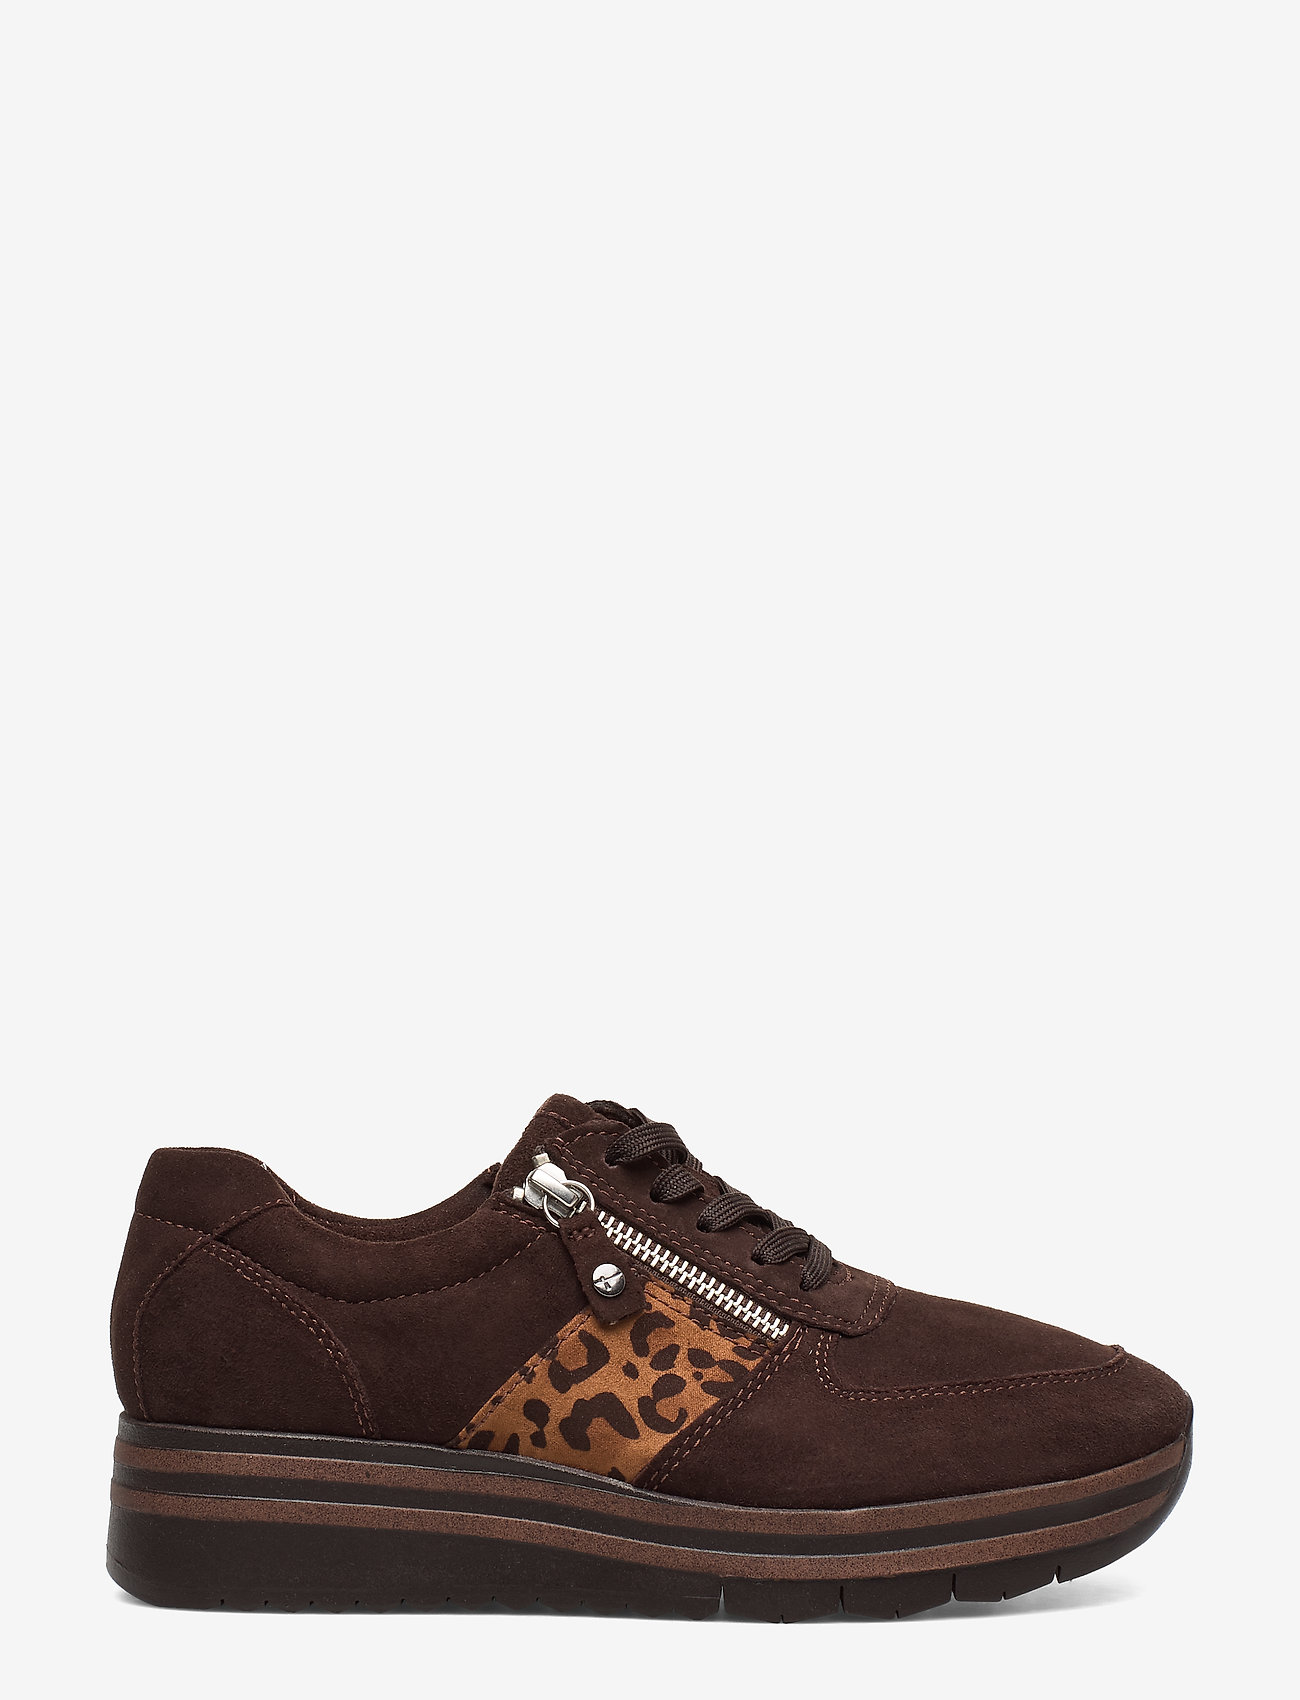 Tamaris - Woms Lace-up - lage sneakers - mocca/leo - 1